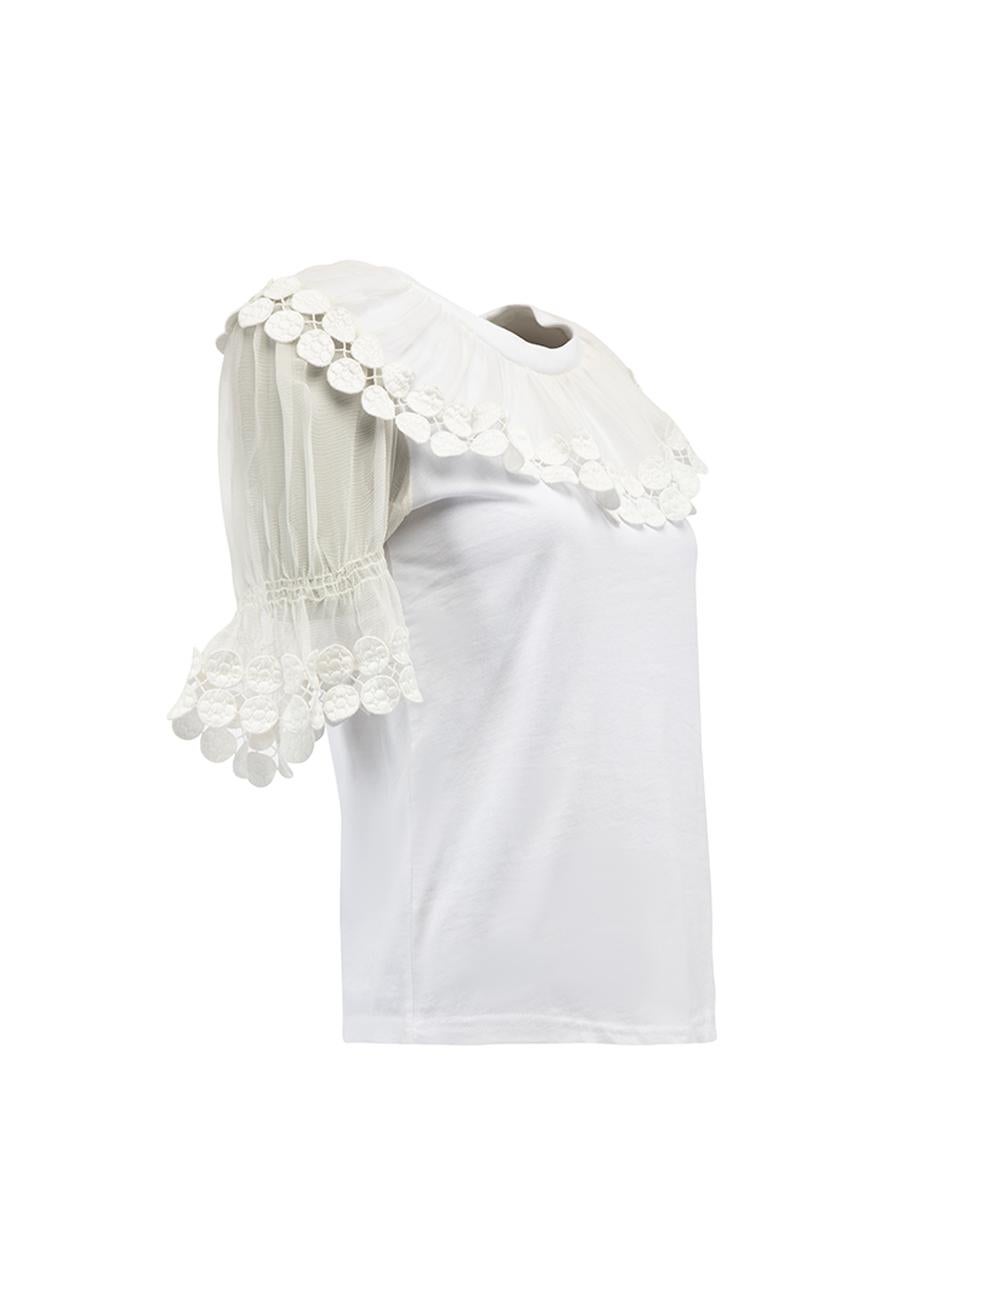 CONDITION is Very good. Minimal wear to blouse is evident. Minimal wear around the underarms on this used Chloe designer resale item. Details White Cotton Short sleeve blouse Round neckline Sheer circles design on neckline and sleeves Made in India